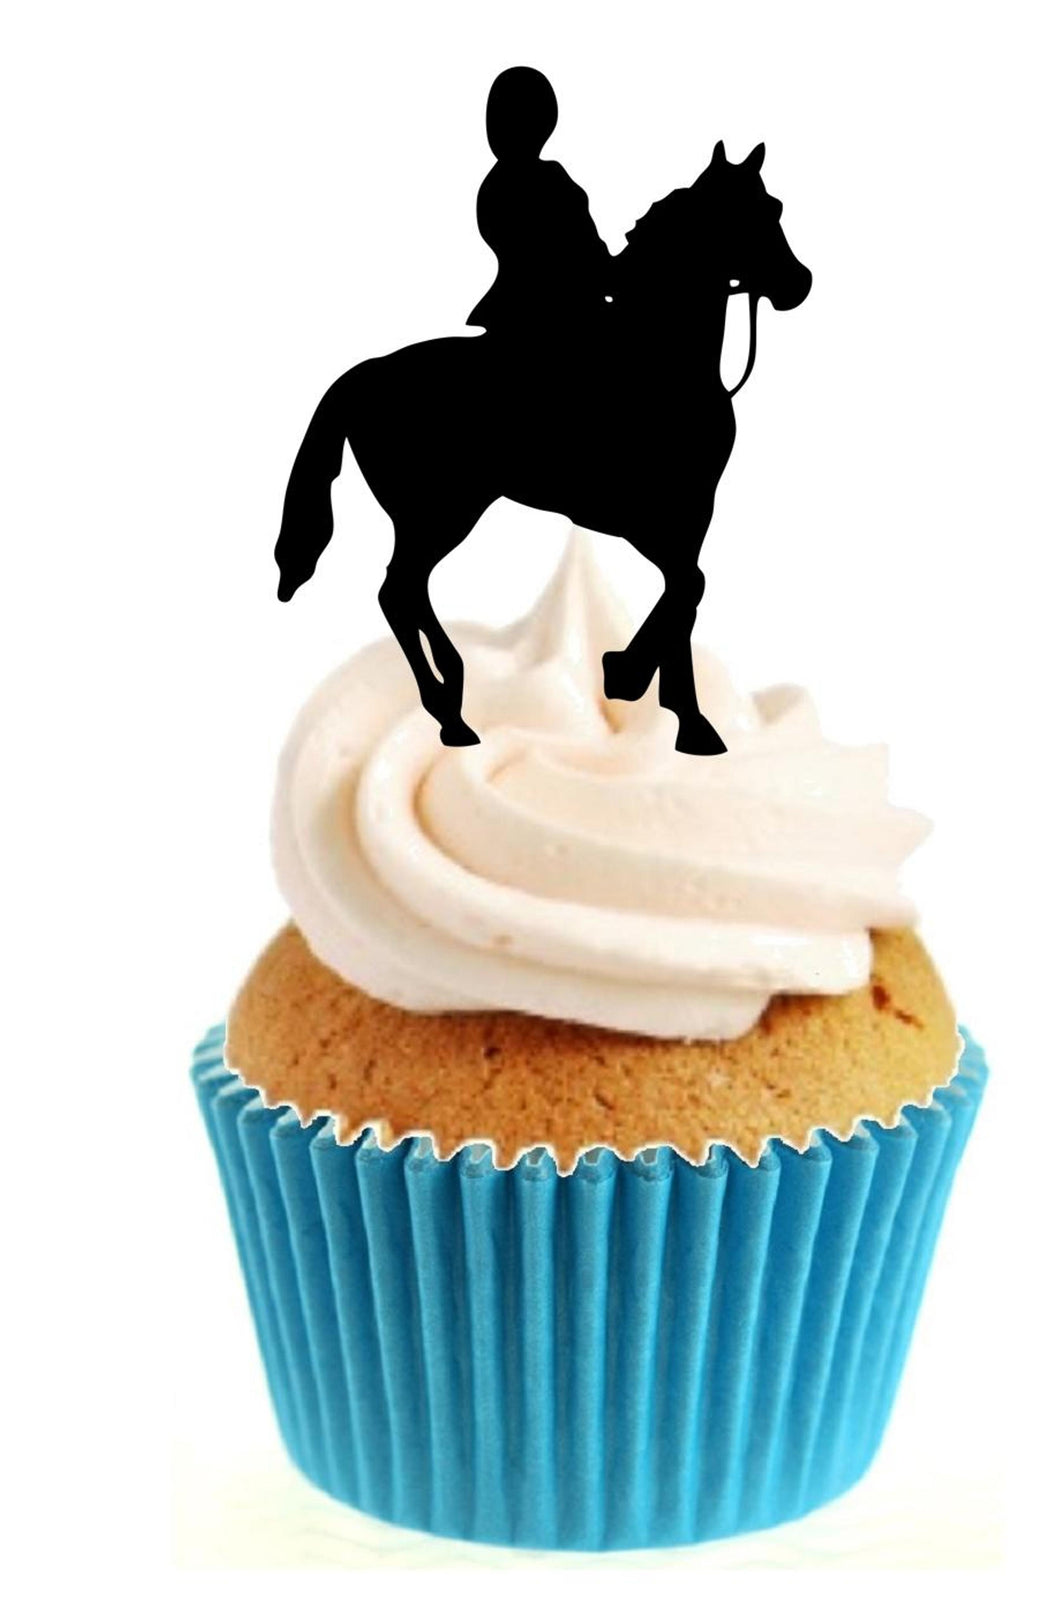 Horse Riding Silhouette Stand Up Cake Toppers (12 pack)